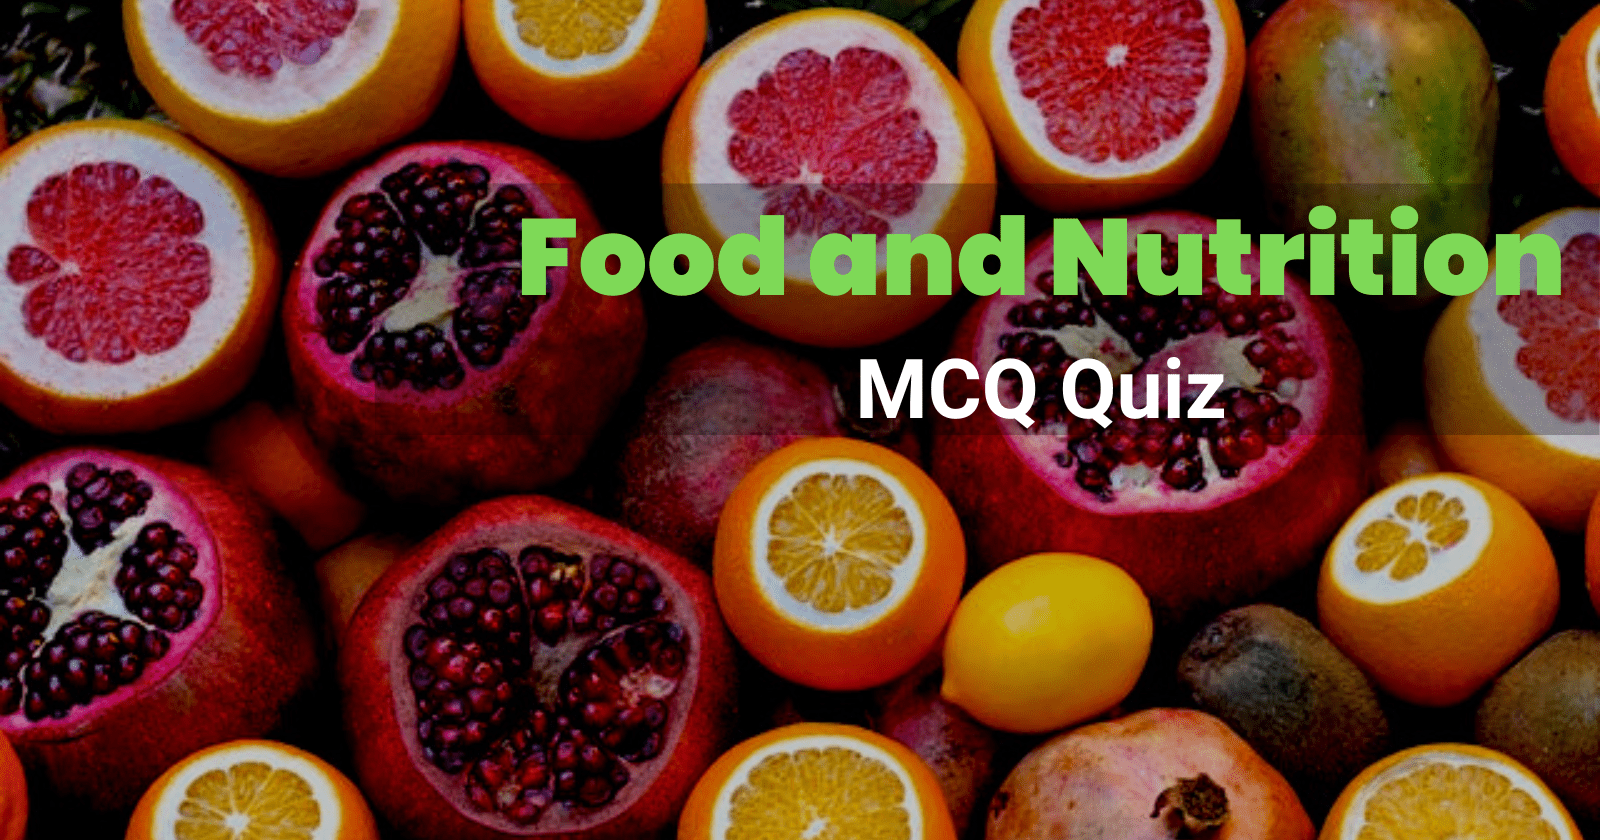 Thumbnail Image for Blog on Food & Nutrition MCQ